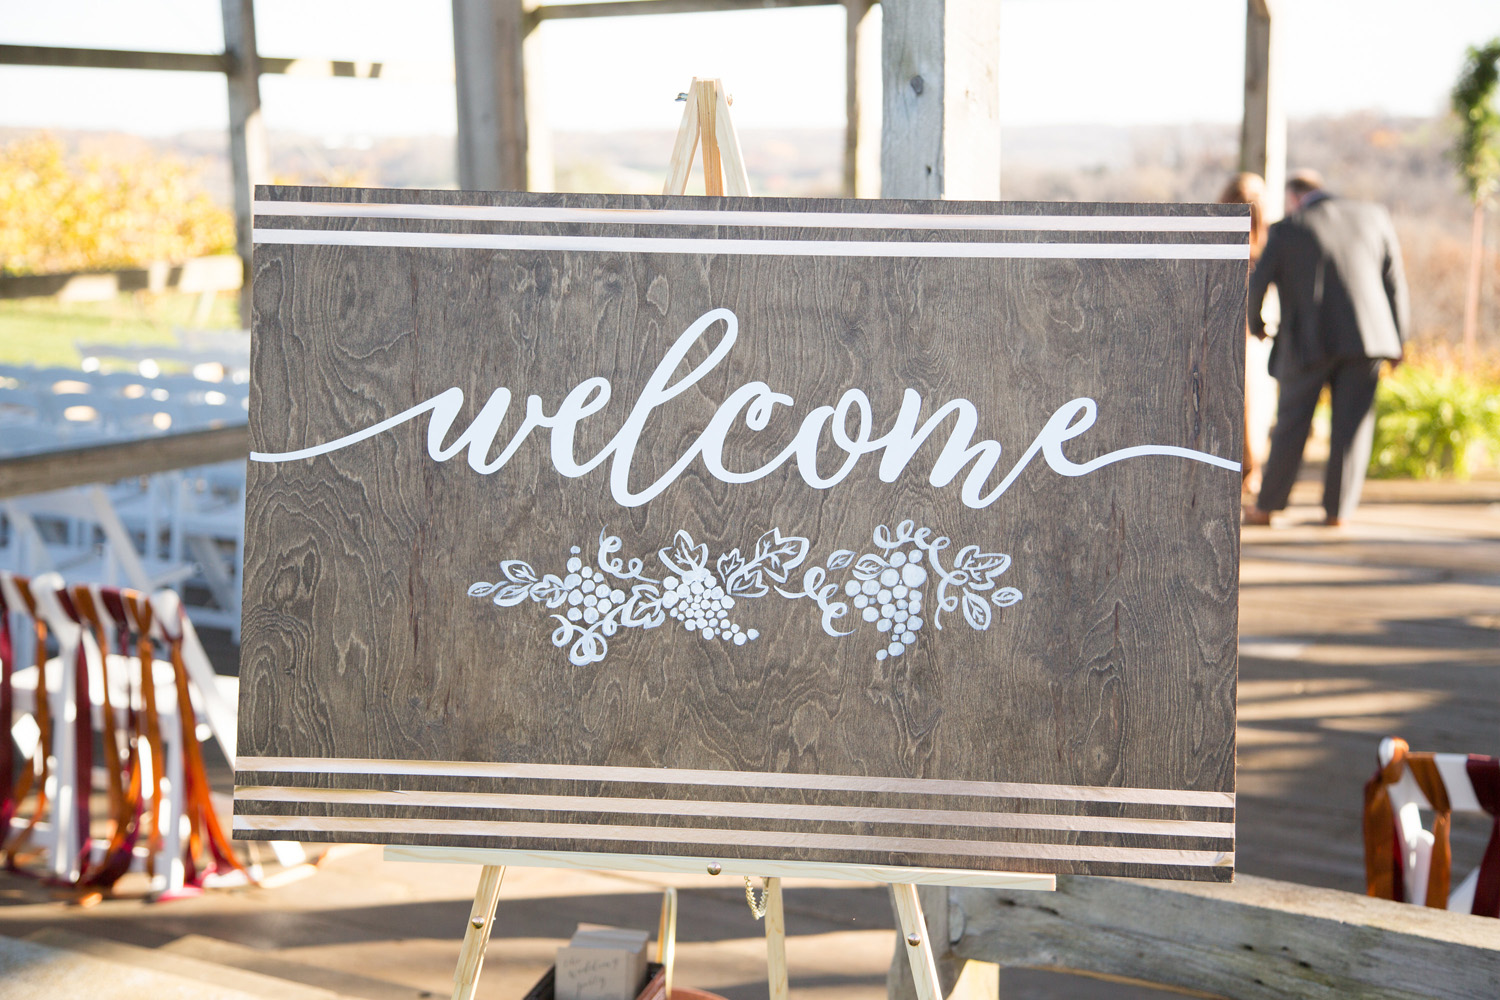 Welcome to our Wedding Entrance Sign and Copper Stand